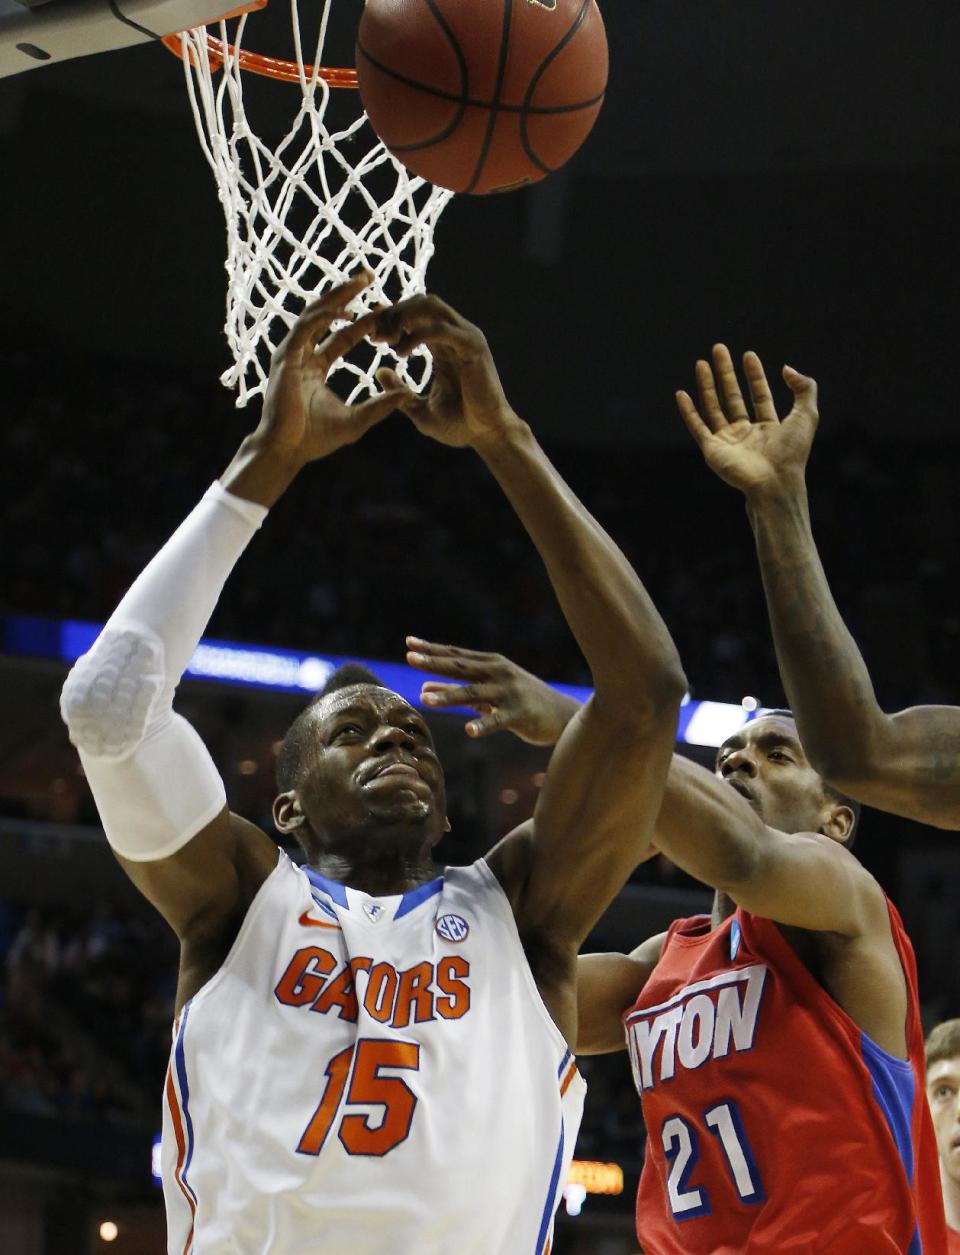 Florida forward Will Yeguete (15) and Dayton forward Dyshawn Pierre (21) vie for a rebound during the first half in a regional final game at the NCAA college basketball tournament, Saturday, March 29, 2014, in Memphis, Tenn. (AP Photo/Mark Humphrey)